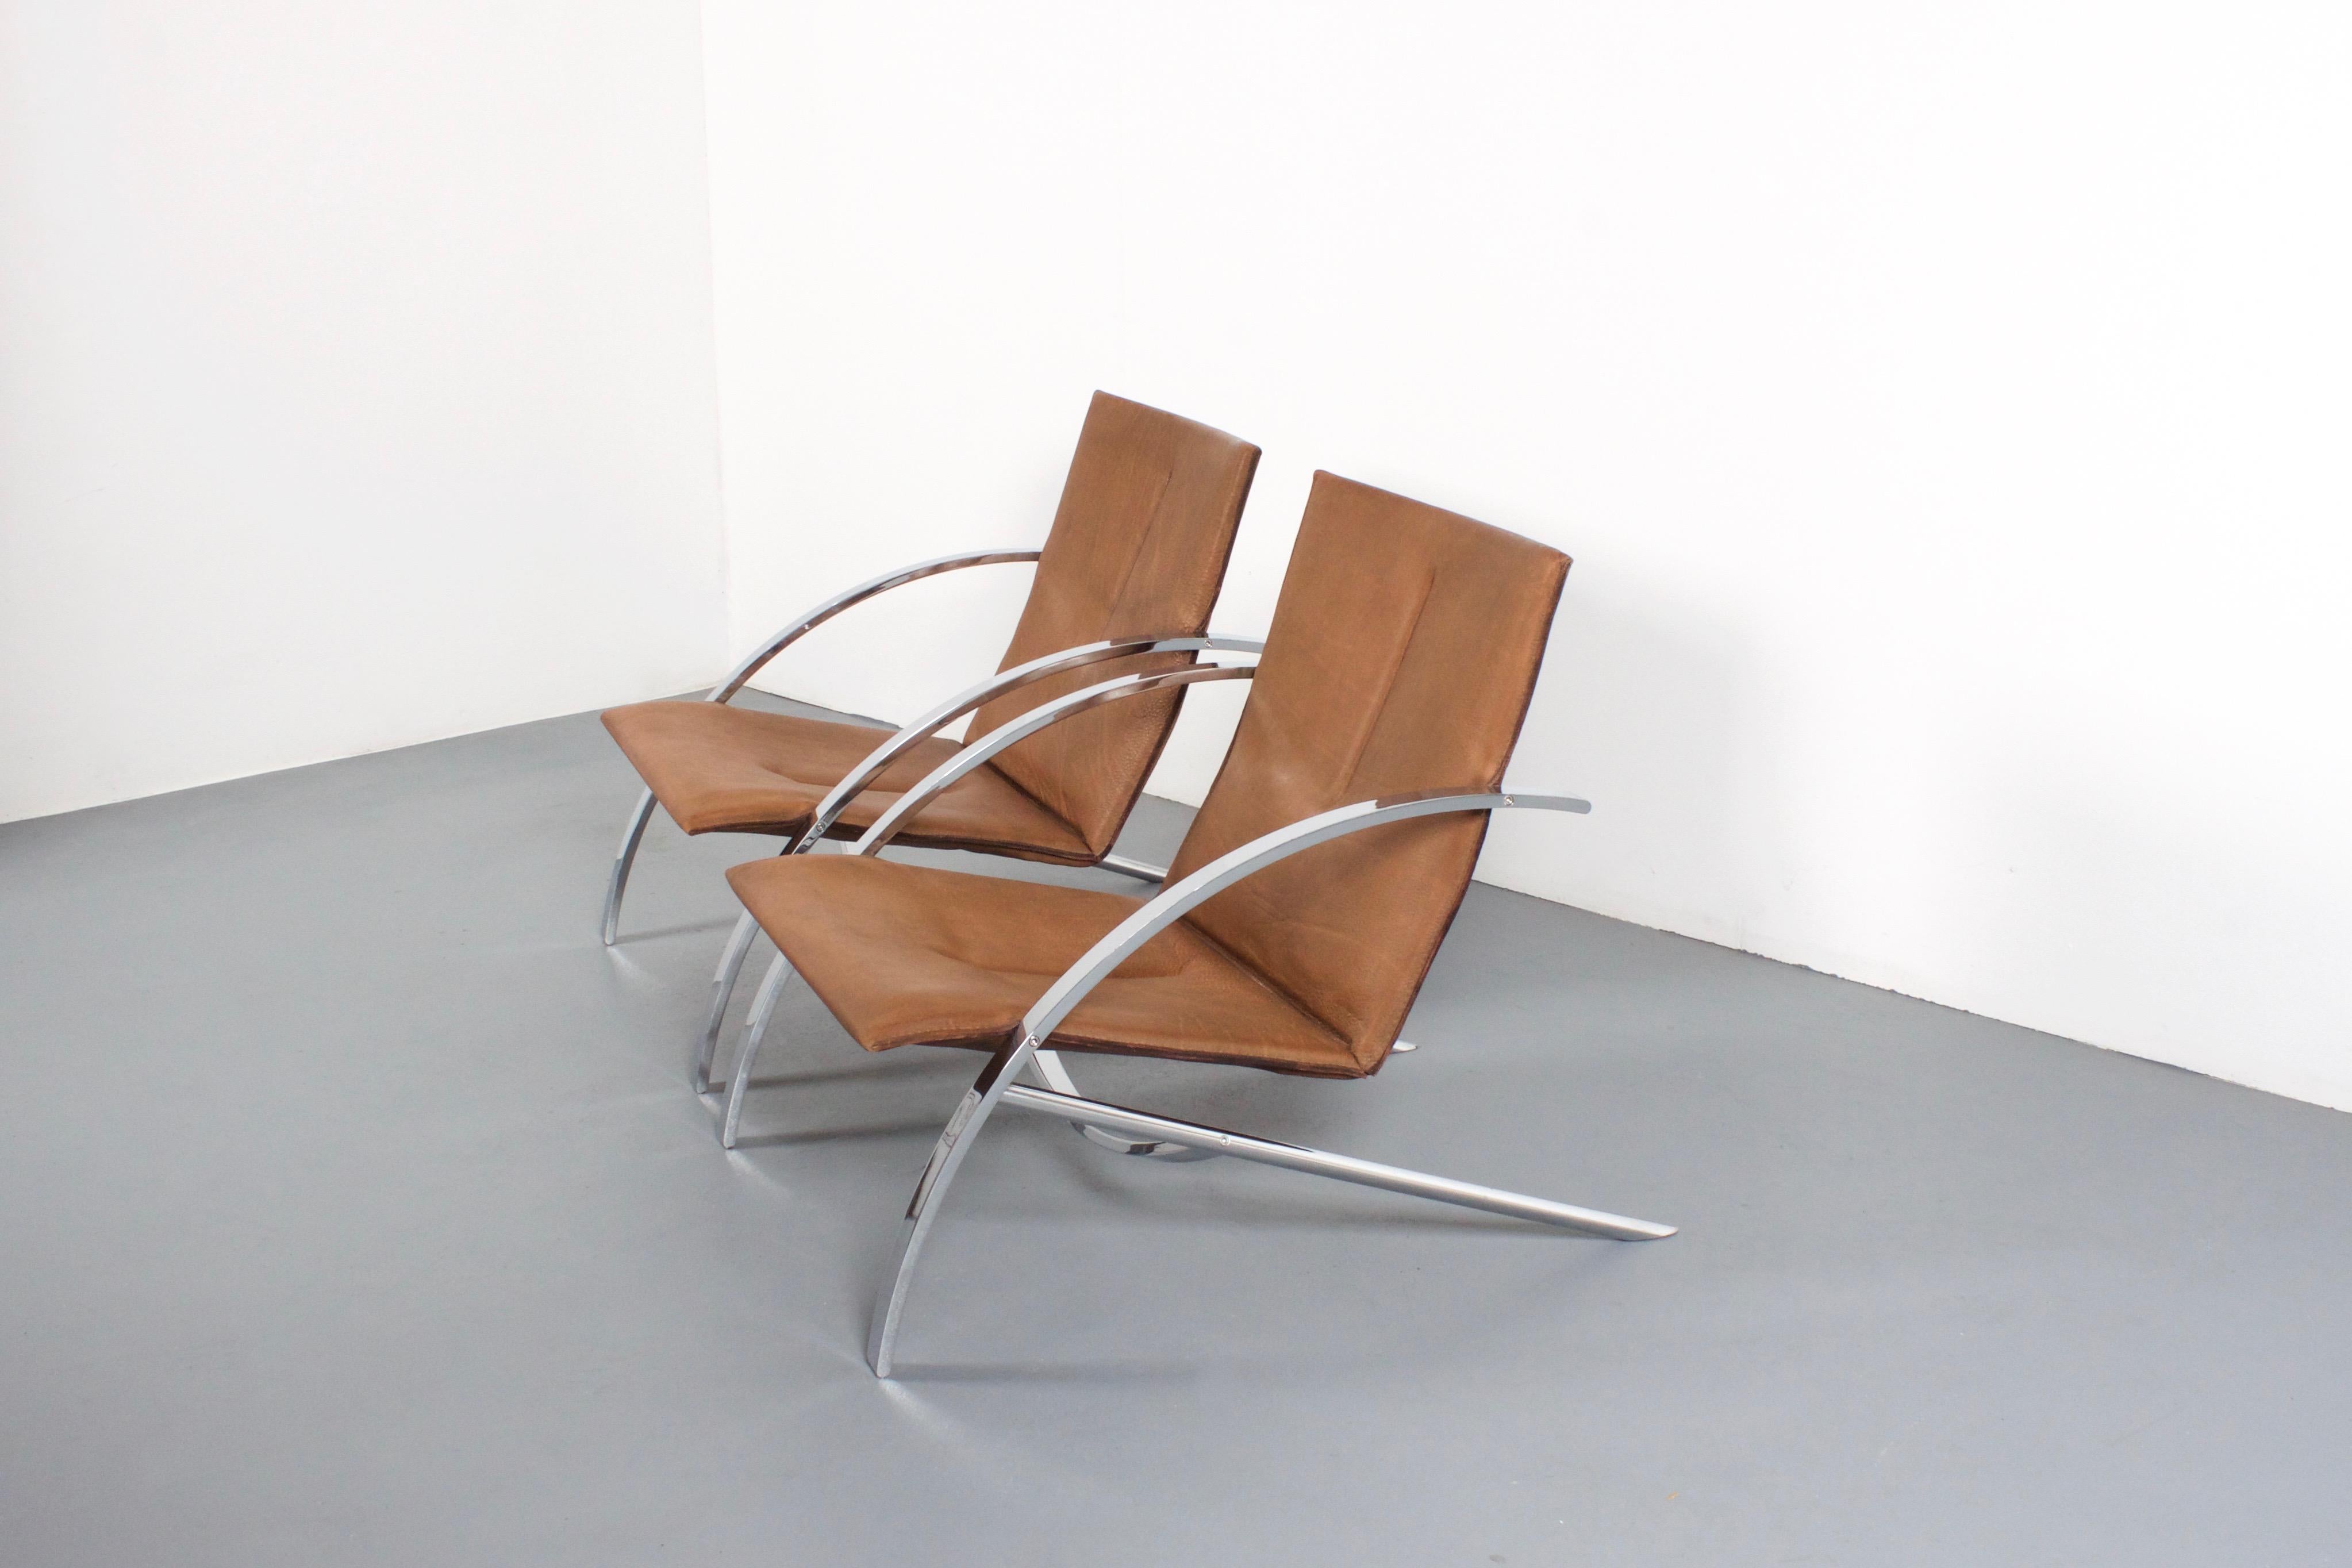 Set of high quality Paul Tuttle ‘Arco’ lounge chairs in very good condition.

Made by Strässle Switzerland.

The chairs have a very heavy polished chrome-plated metal frame. 

The seating of these ‘Arco’ chairs is made from a 4-5 mm. thick natural